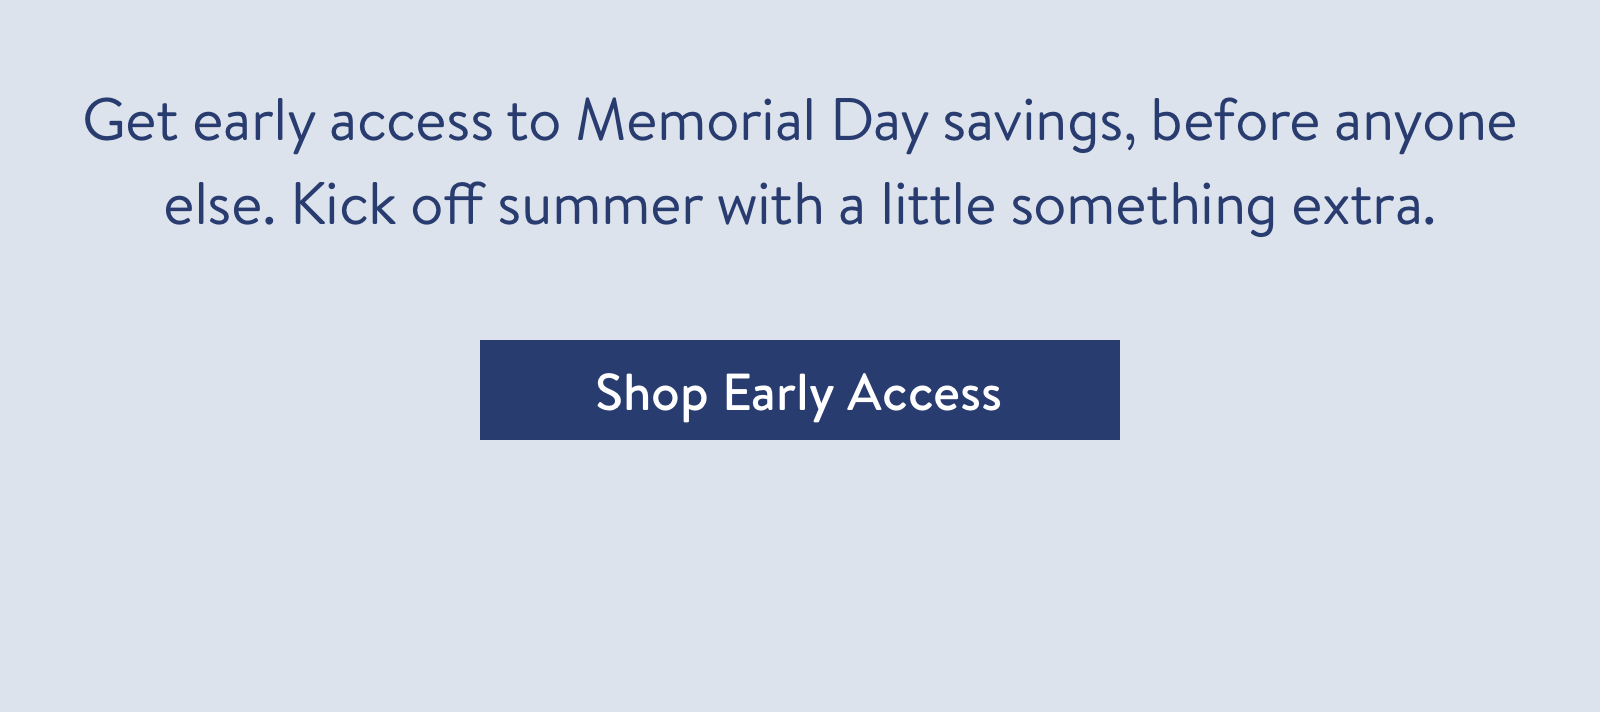 Get early access to Memorial Day savings, before anyone else. Kick off summer with a little something extra.